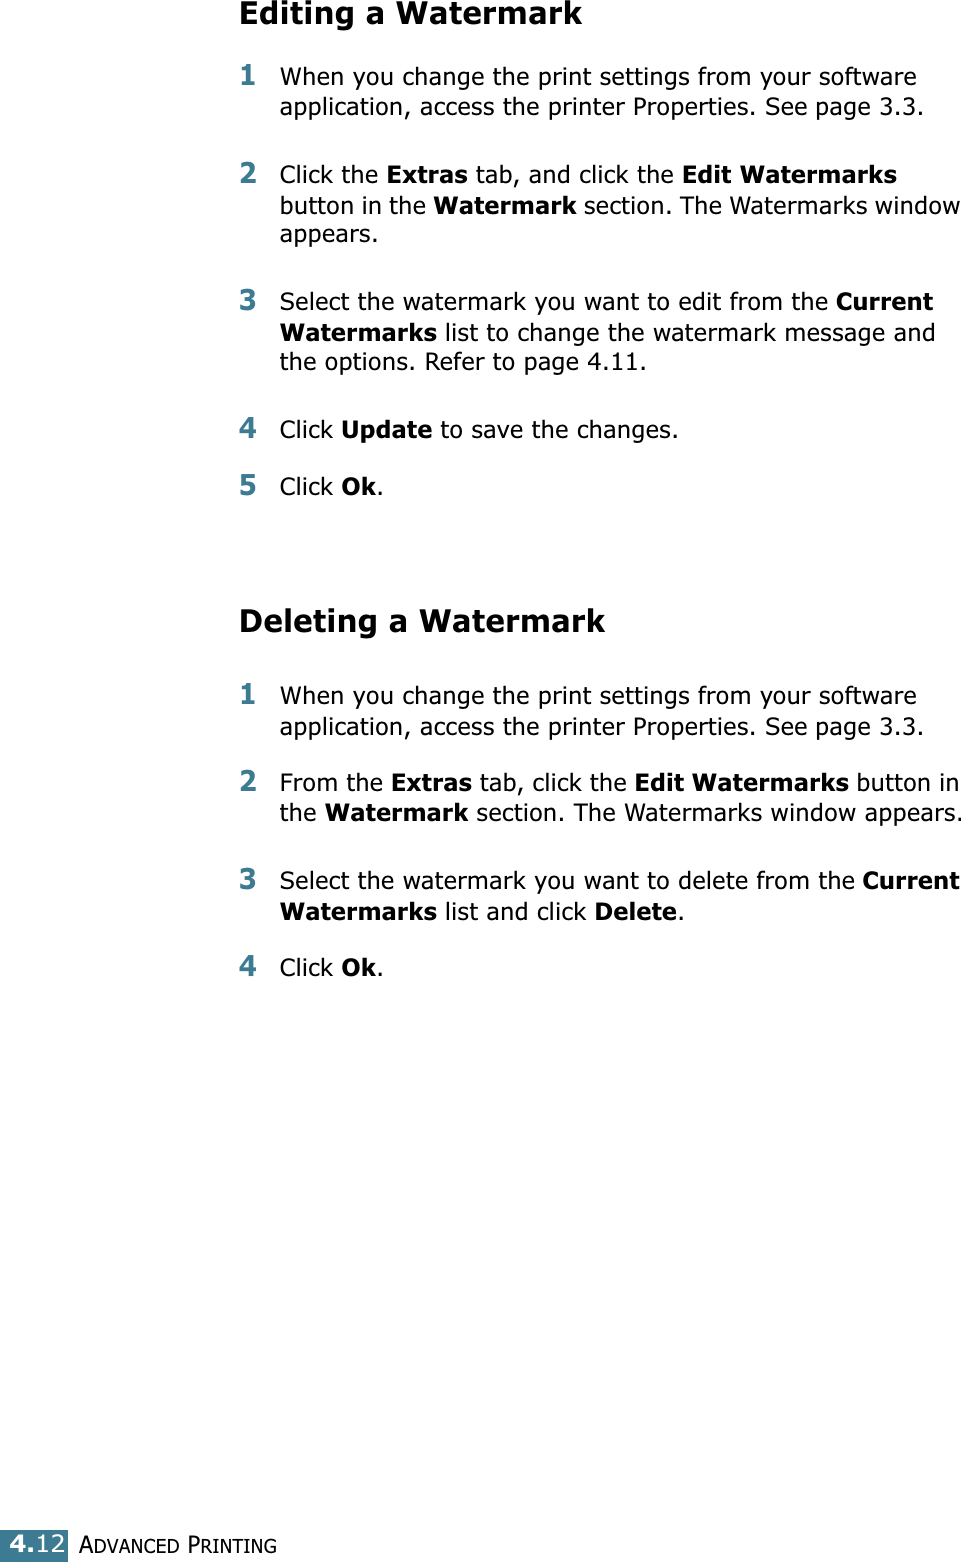 ADVANCED PRINTING4.12Editing a Watermark1When you change the print settings from your software application, access the printer Properties. See page 3.3. 2Click the Extras tab, and click the Edit Watermarks button in the Watermark section. The Watermarks window appears.3Select the watermark you want to edit from the Current Watermarks list to change the watermark message and the options. Refer to page 4.11. 4Click Update to save the changes.5Click Ok. Deleting a Watermark1When you change the print settings from your software application, access the printer Properties. See page 3.3.2From the Extras tab, click the Edit Watermarks button in the Watermark section. The Watermarks window appears.3Select the watermark you want to delete from the Current Watermarks list and click Delete. 4Click Ok.